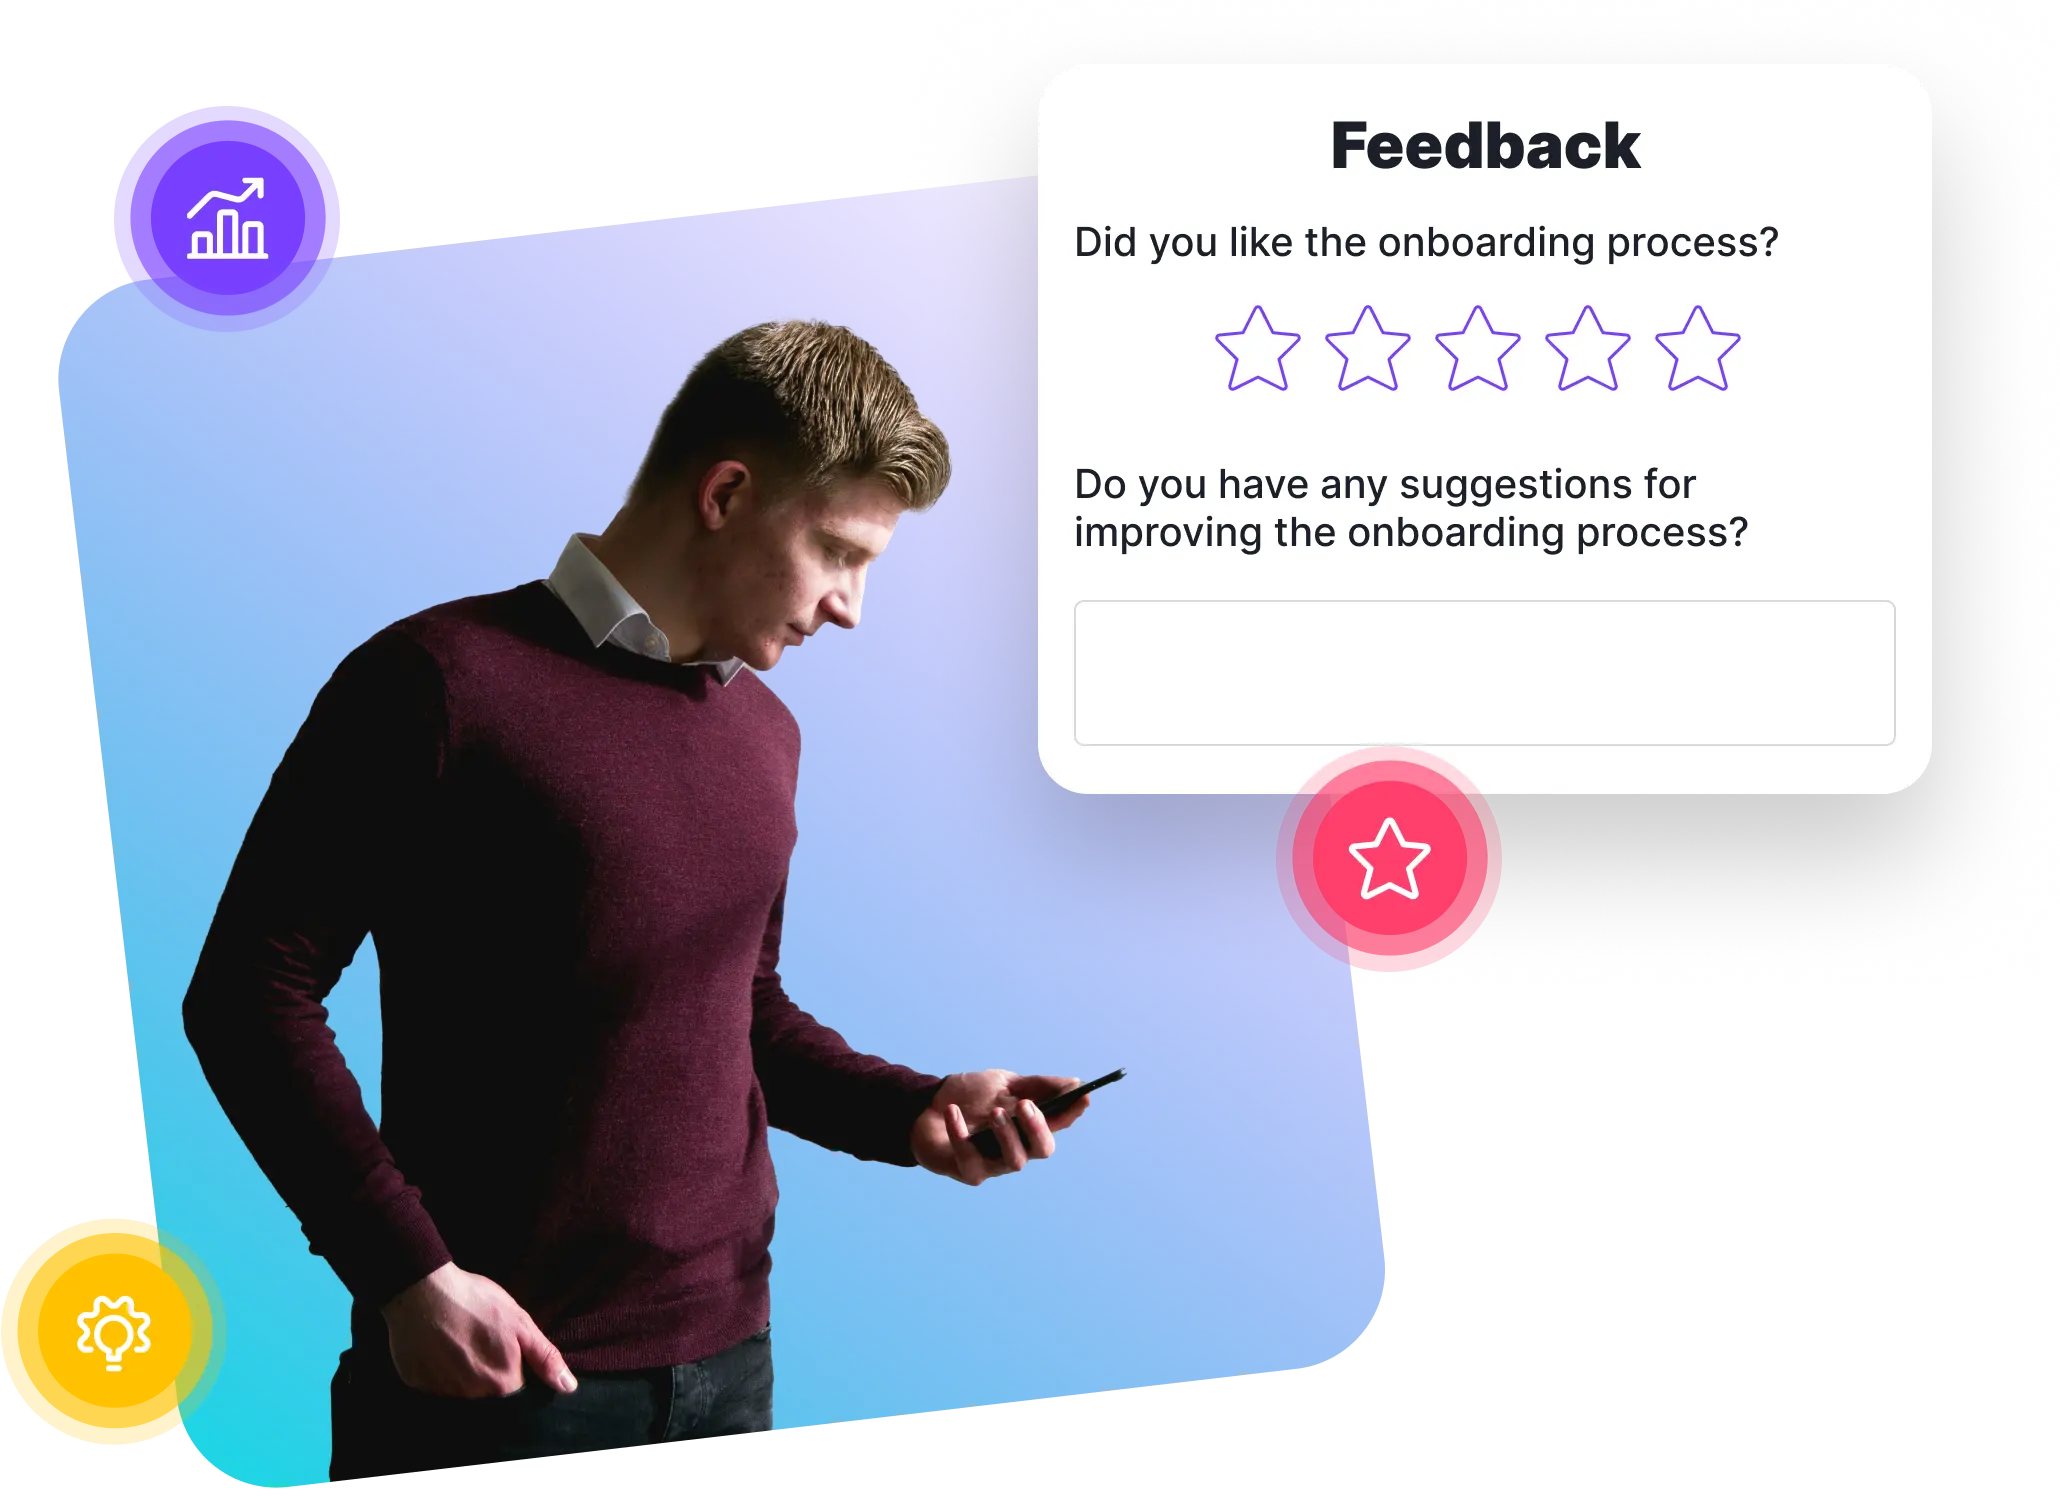 Collect feedback on the onboarding process via the onboarding app